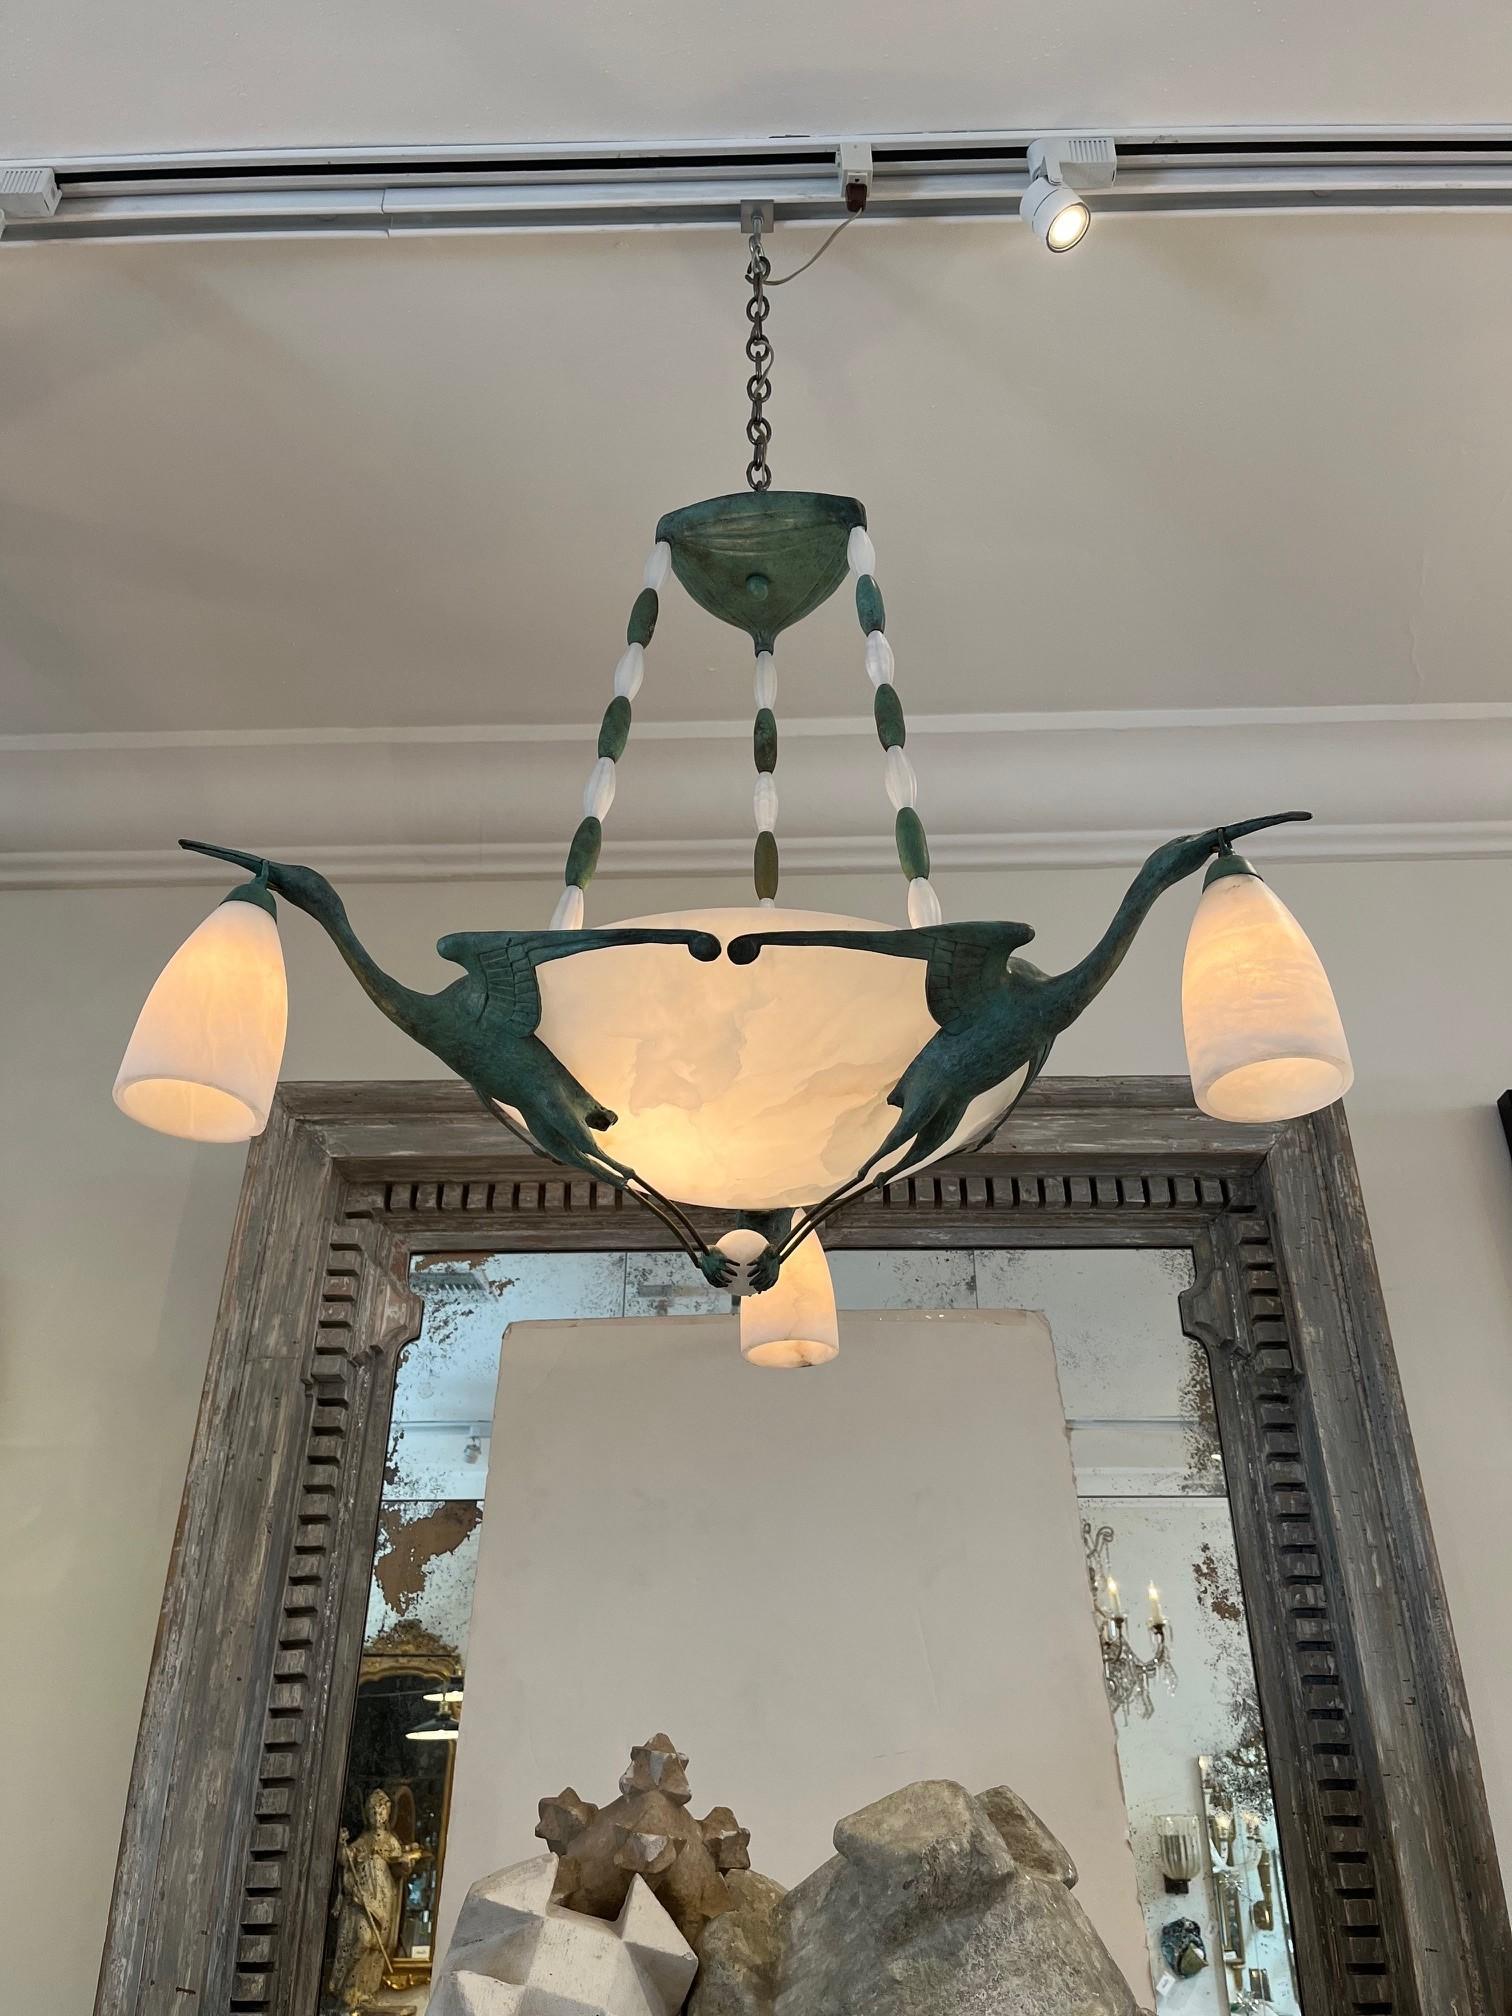 A alabaster and Bronze cast flying Crane's Chandelier . Made in the manner of Albert Cheuret. Has a unique green patina finish and looks amazing when lit up . Has been in private collection of Art Deco and now in showroom . Well taken care of . Not